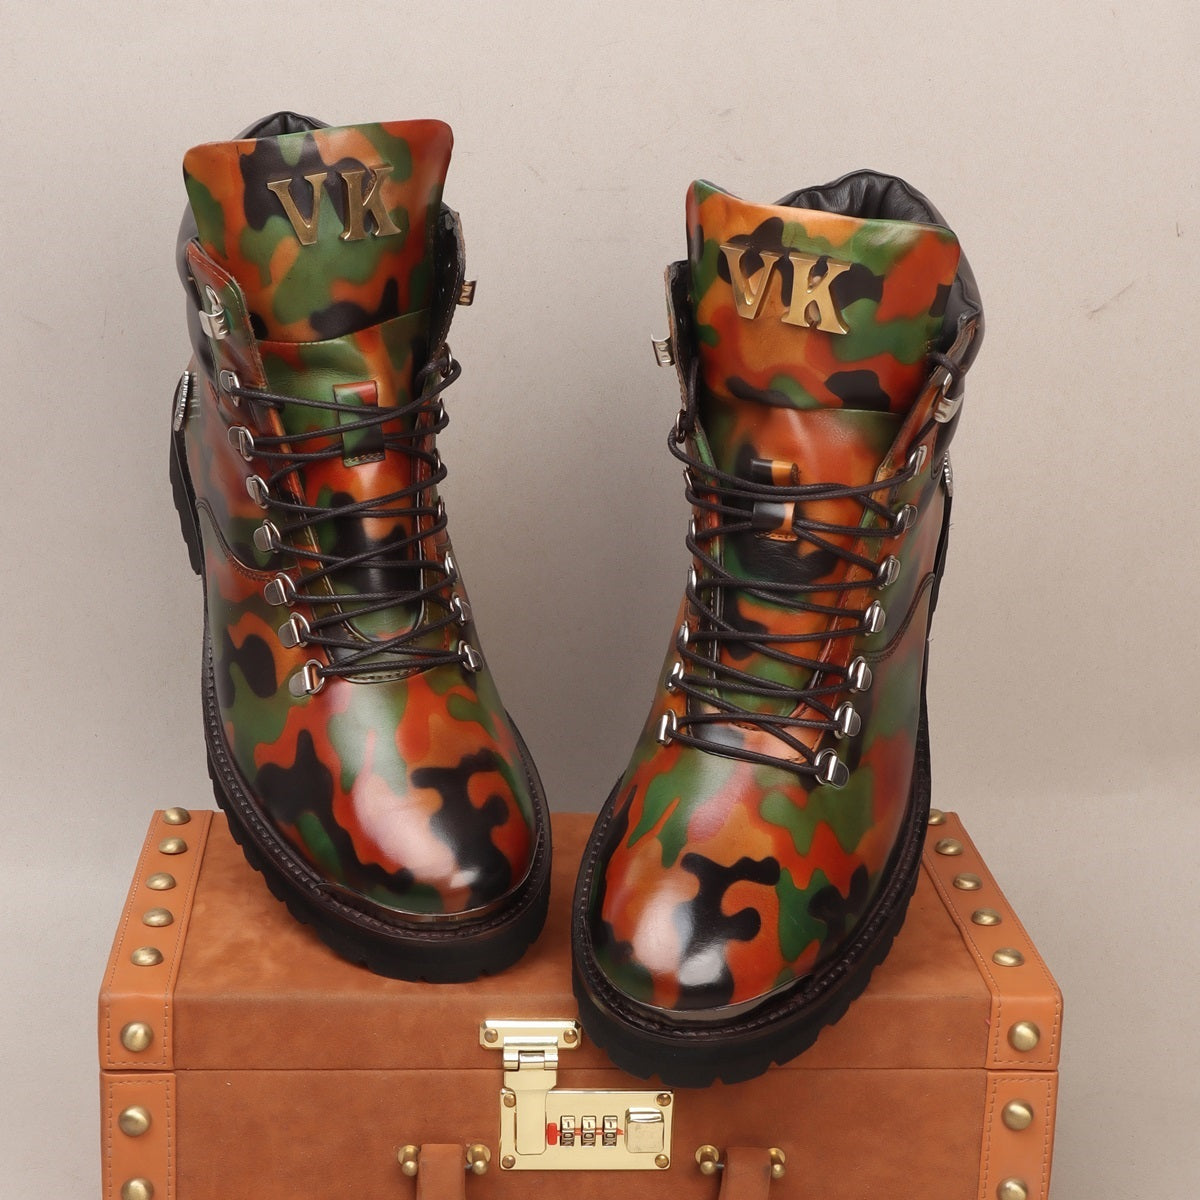 Customized "VK" Initial Camo Hand-Paint Leather Biker Boots For Men By Brune & Bareskin